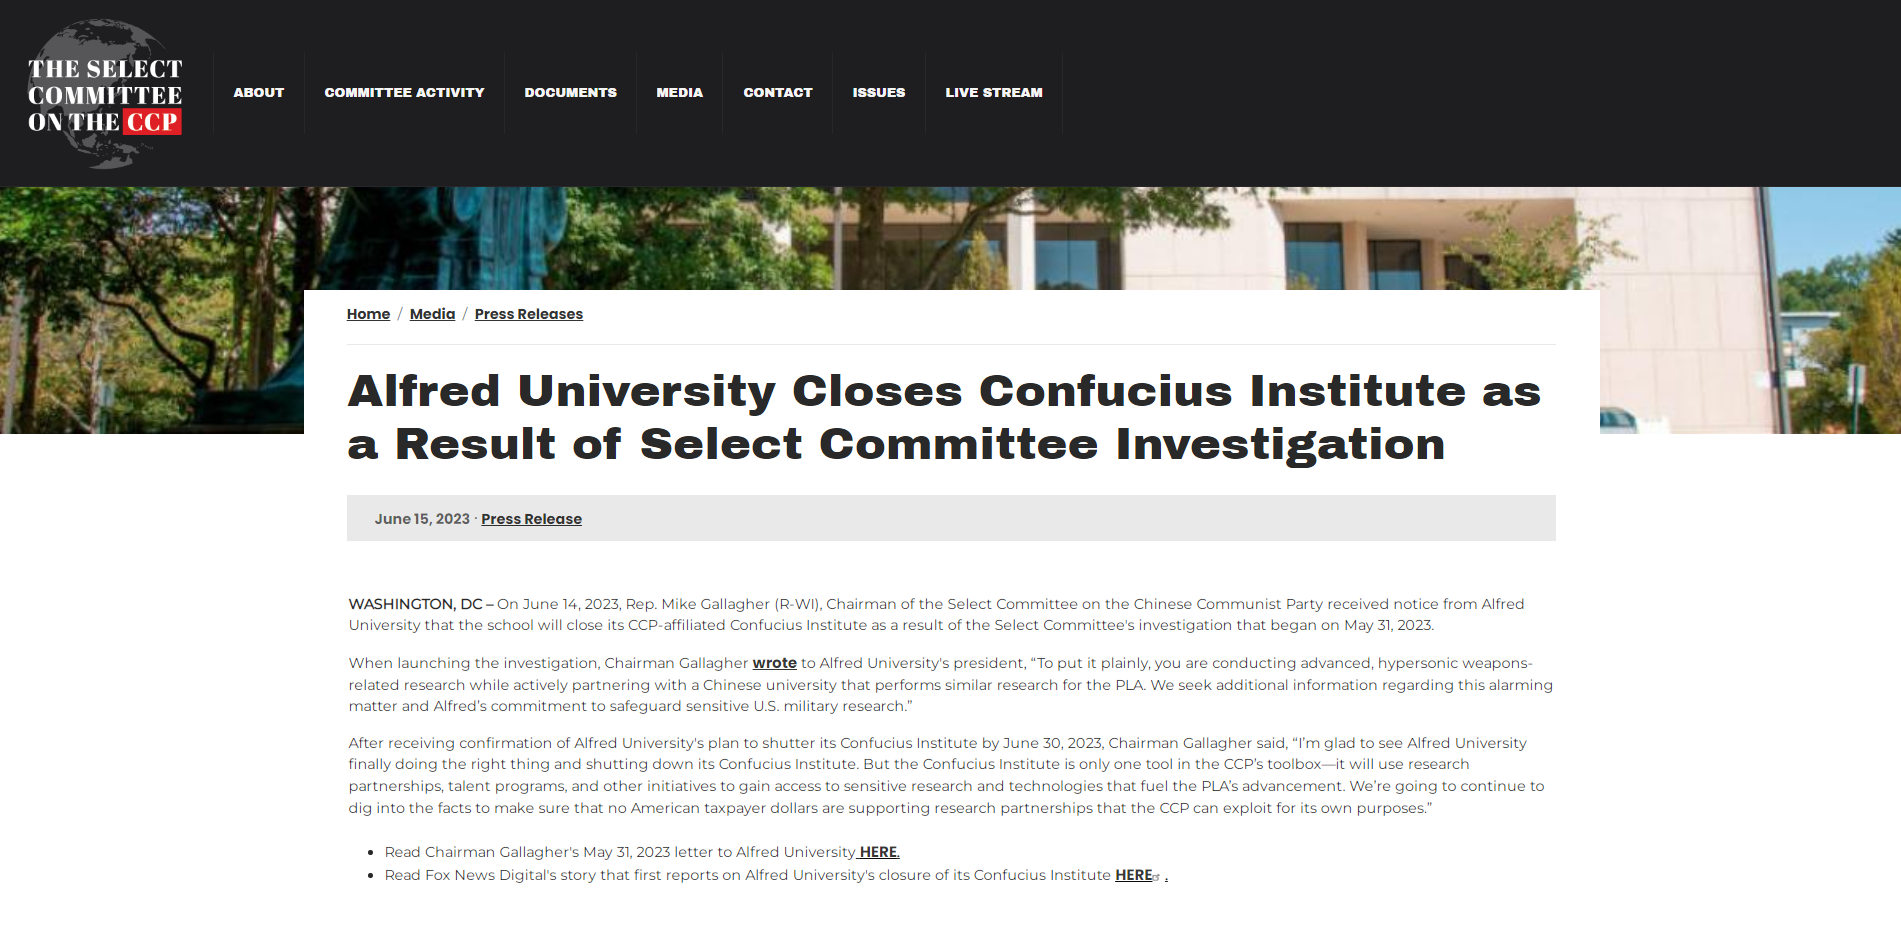 A screenshot of the Select Committee on the Chinese Communist Party's announcement that Alfred University will close its Confucius Institute.